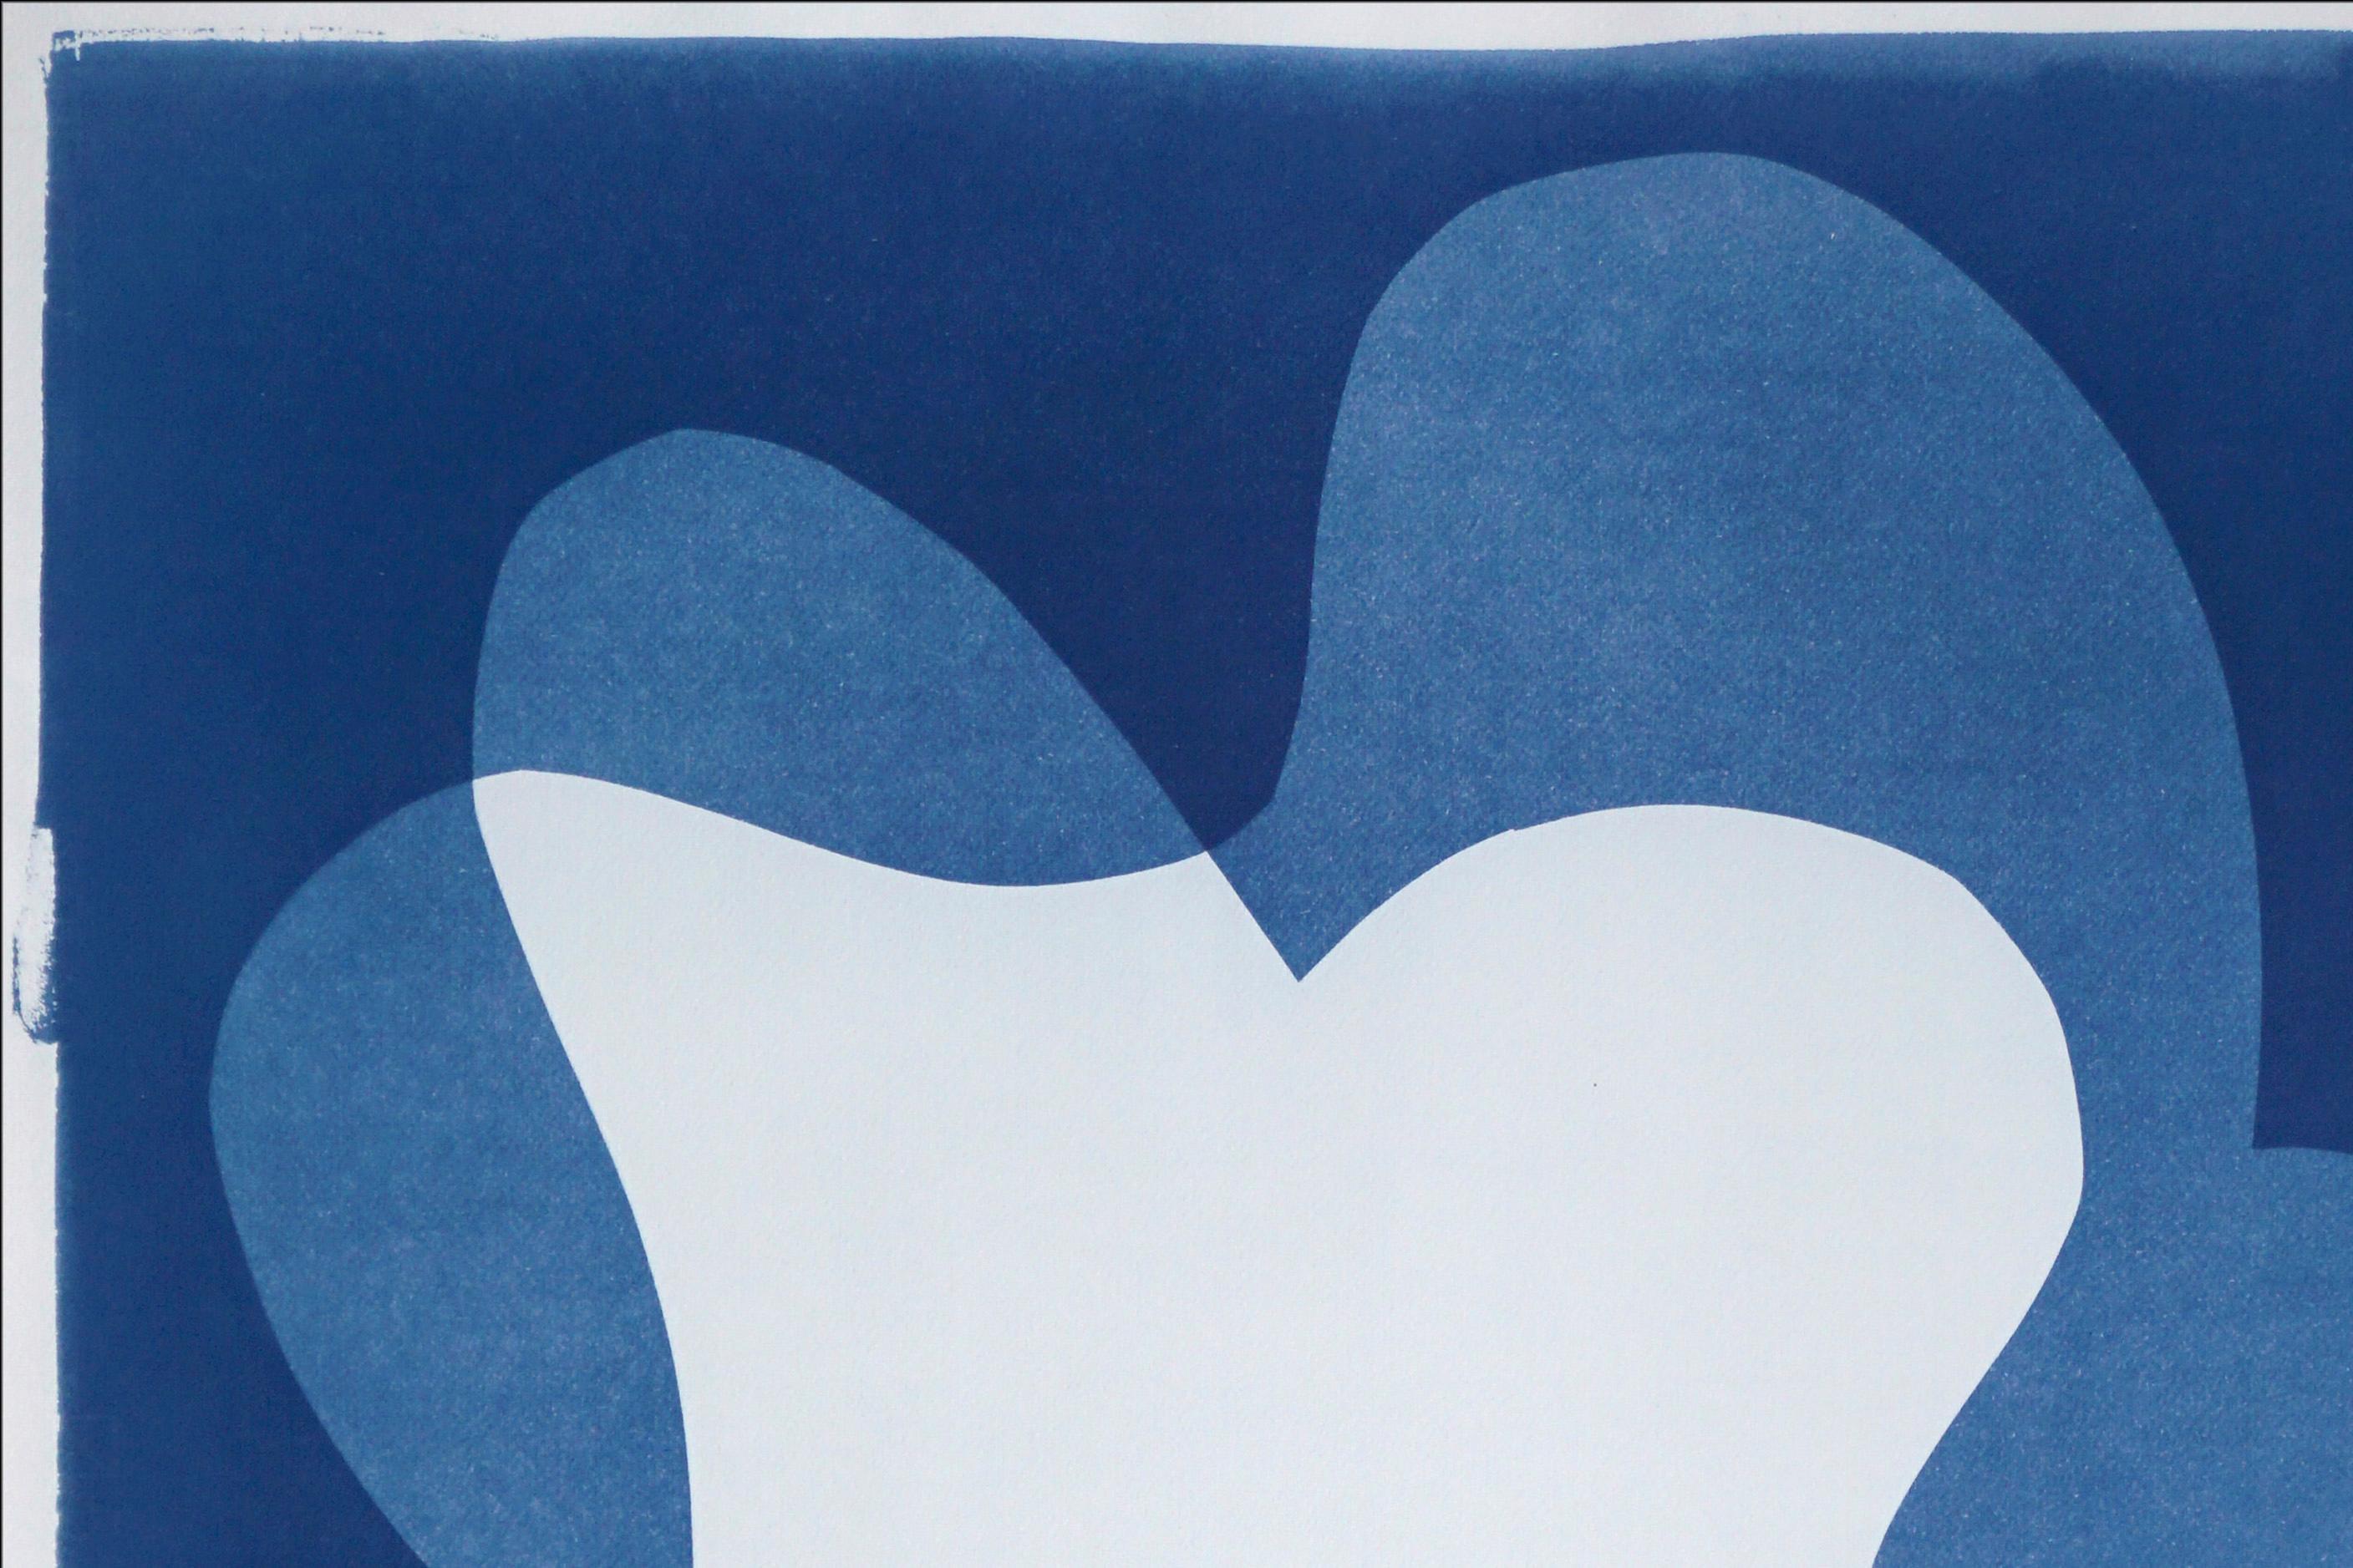 Fat Finger, Blue and White Abstract Rounded Bodies, Cyanotype Monotype on Paper 1